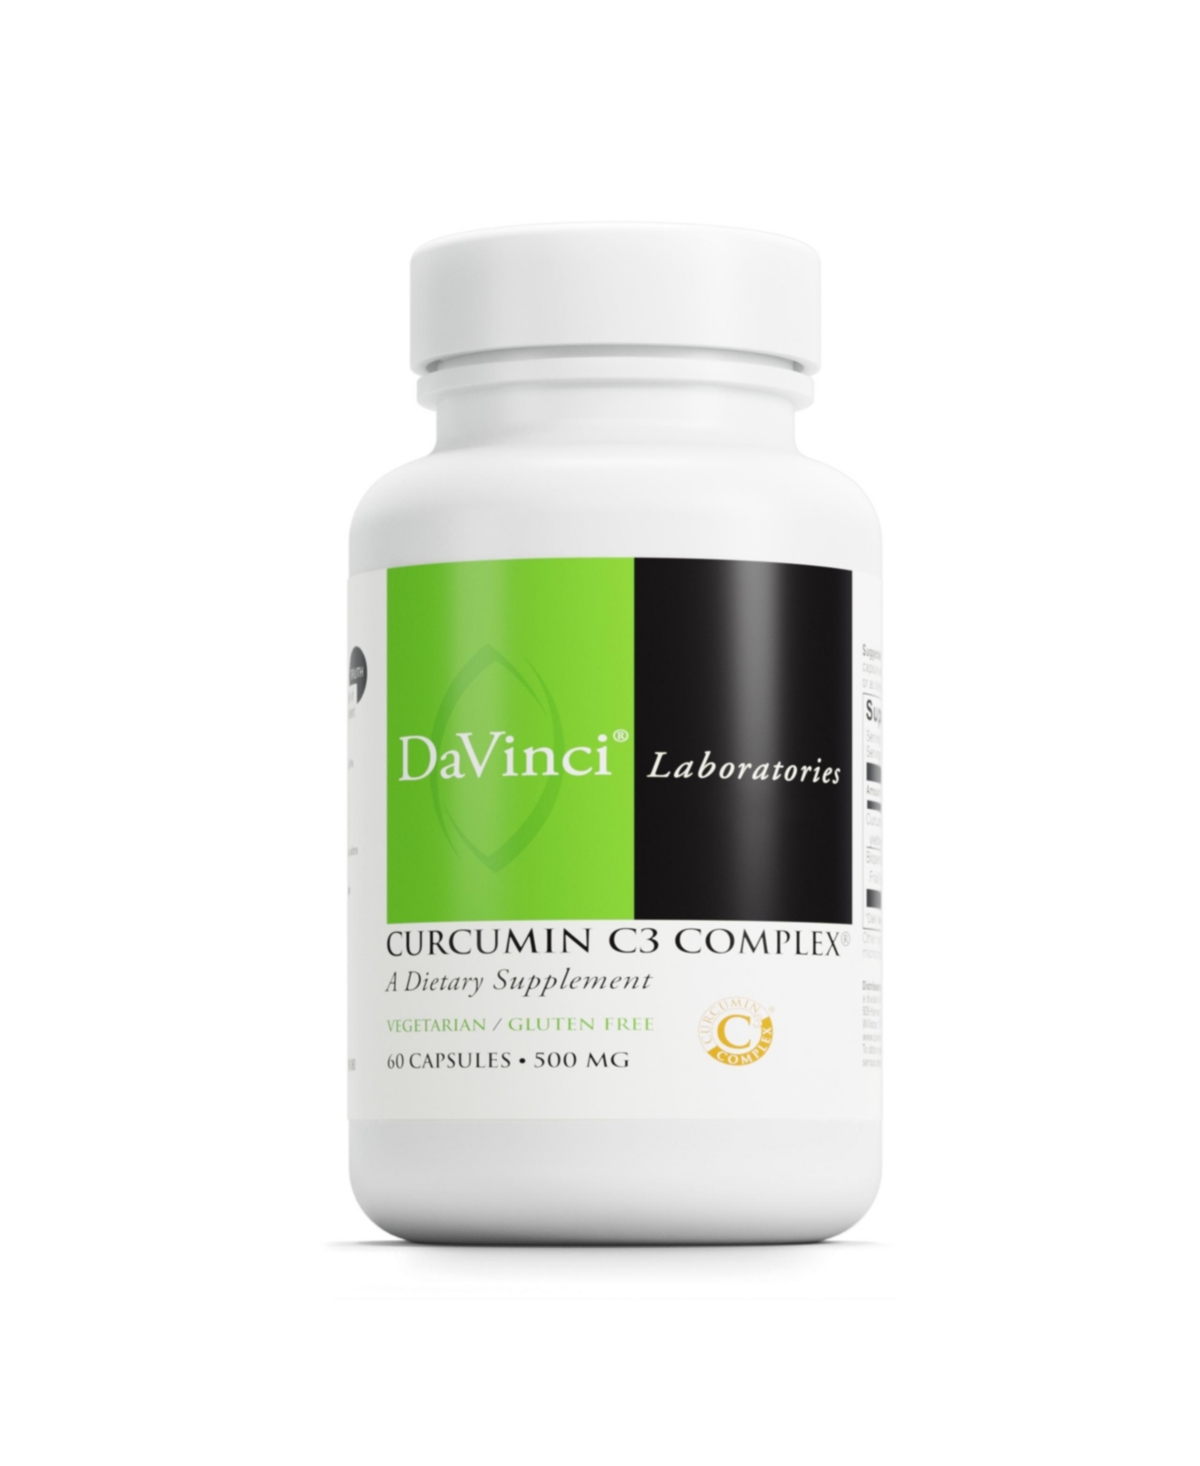 DaVinci Labs Curcumin C3 Complex - Dietary Supplement to Support Gallbladder Function and Healthy Liver - With Curcuminoids and Bioperine Fruit Extrac